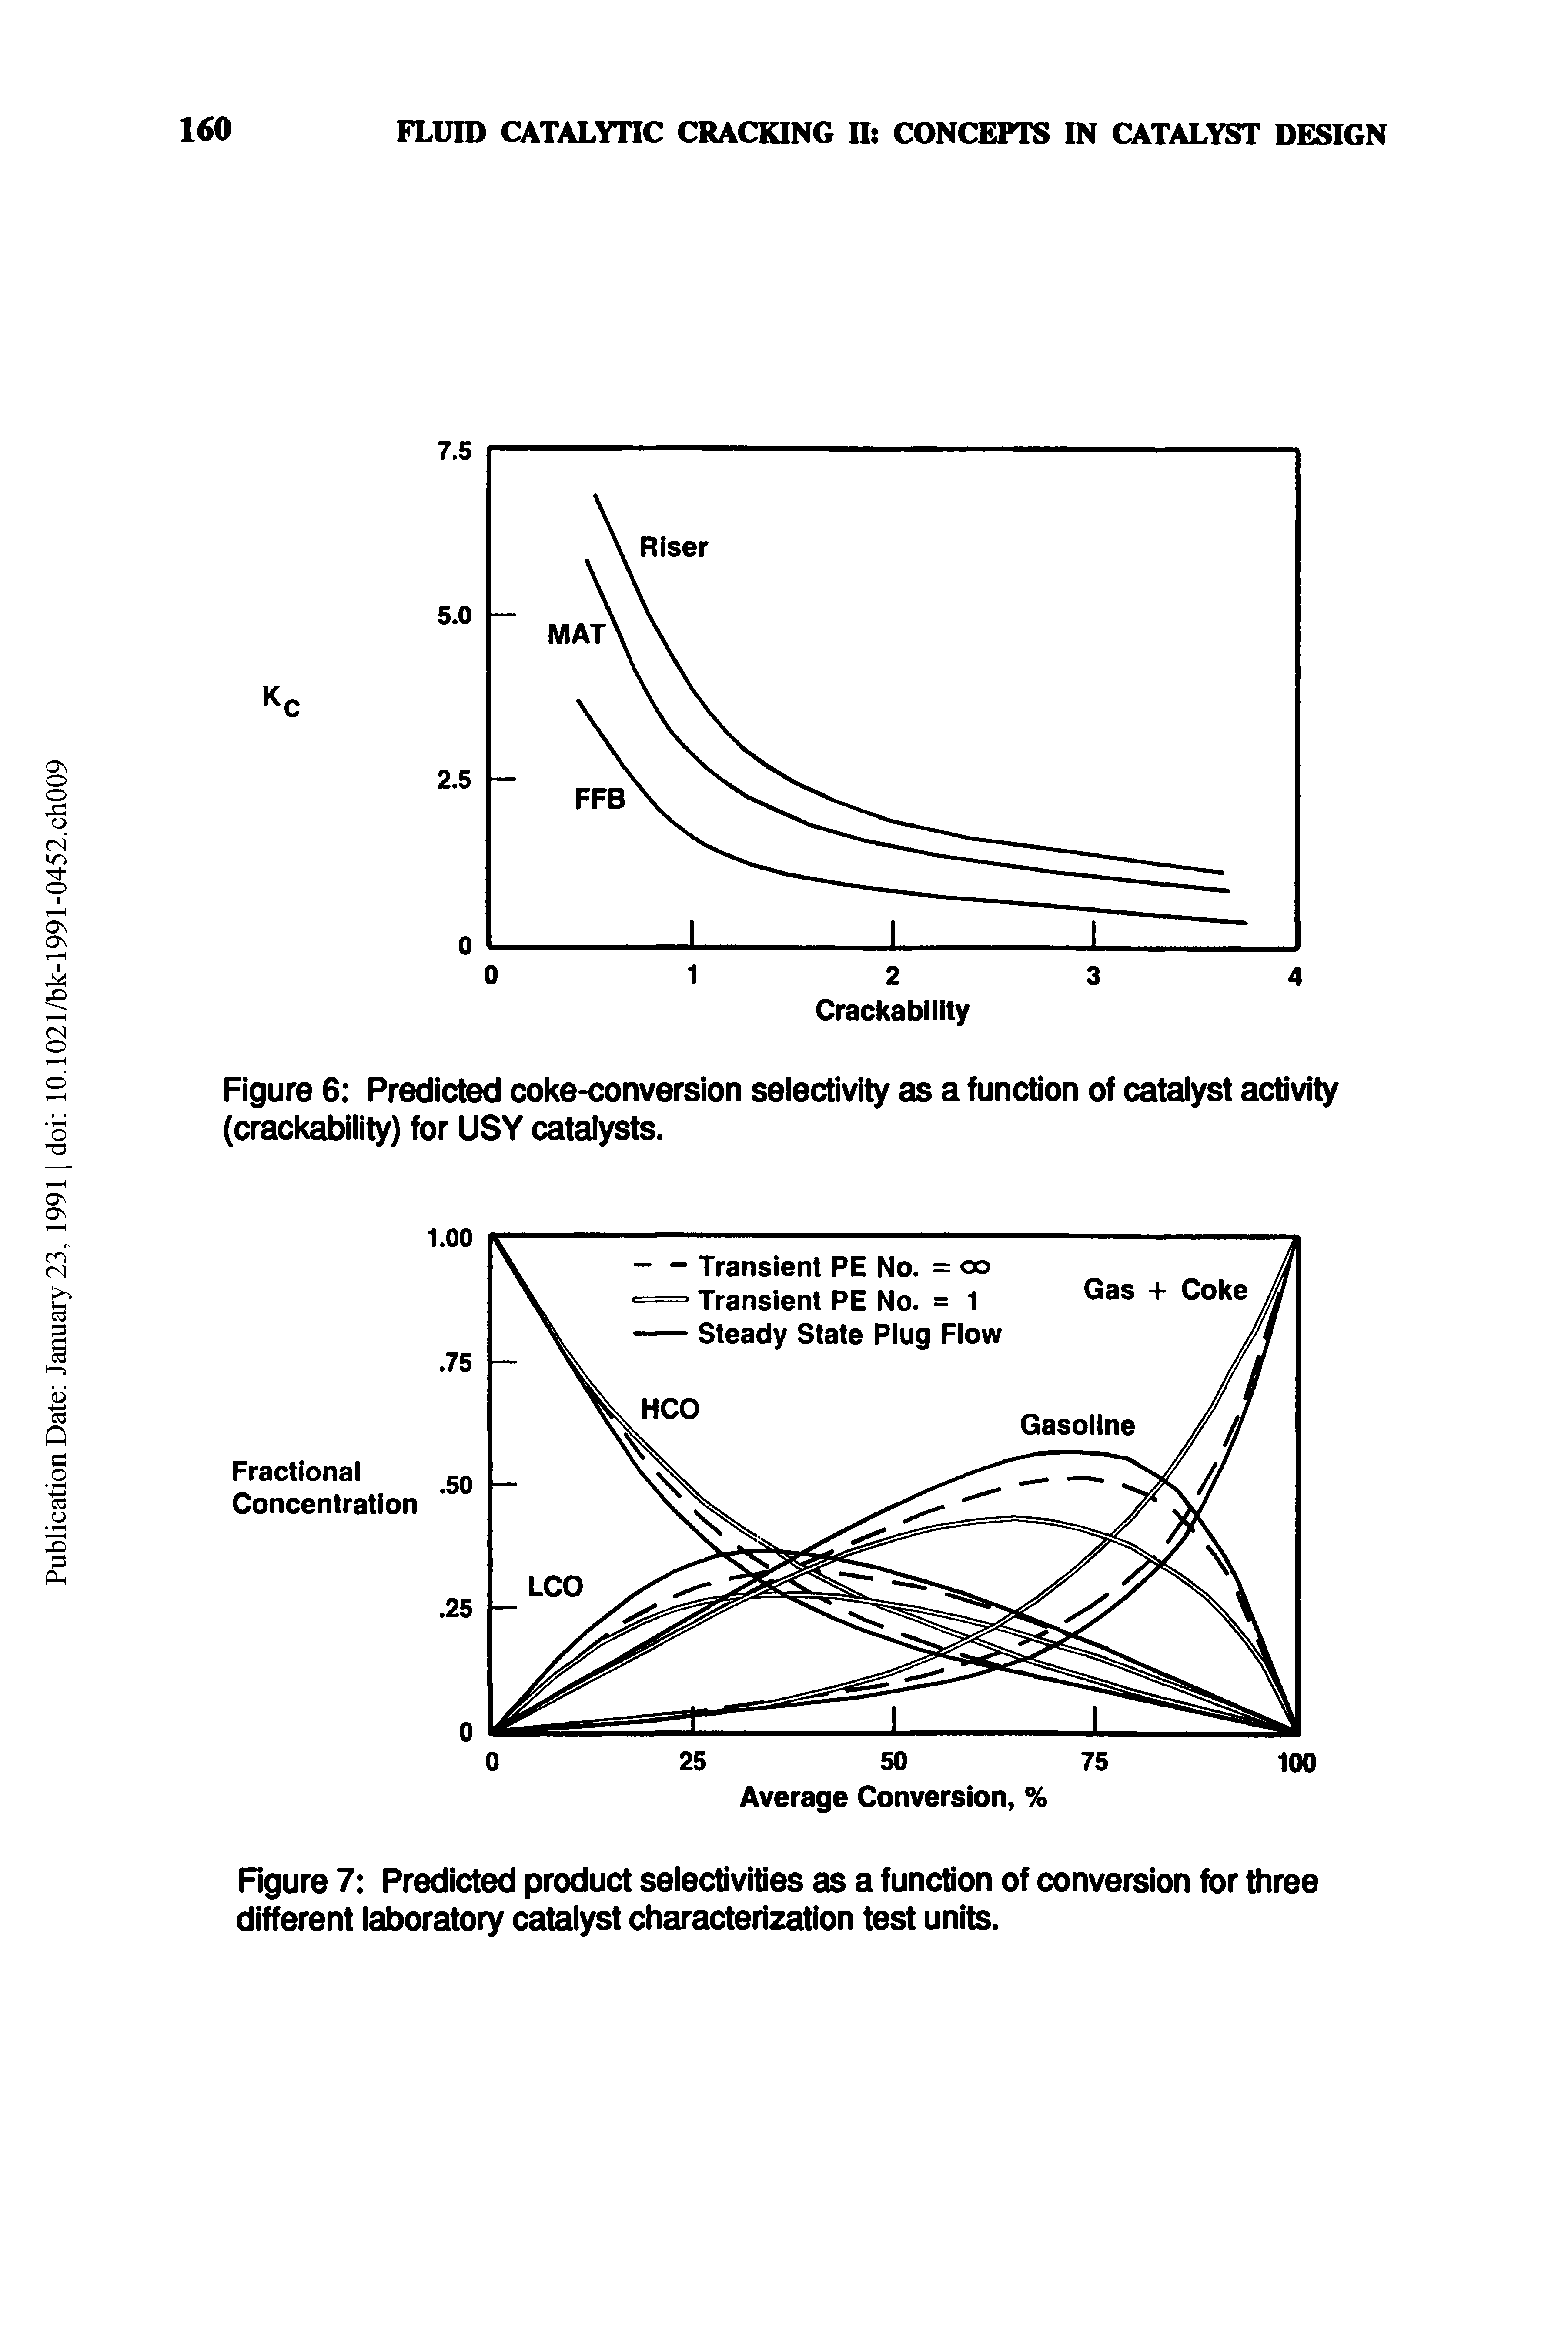 Figure 7 Predicted product selectivities as a function of conversion for three different laboratory catalyst characterization test units.